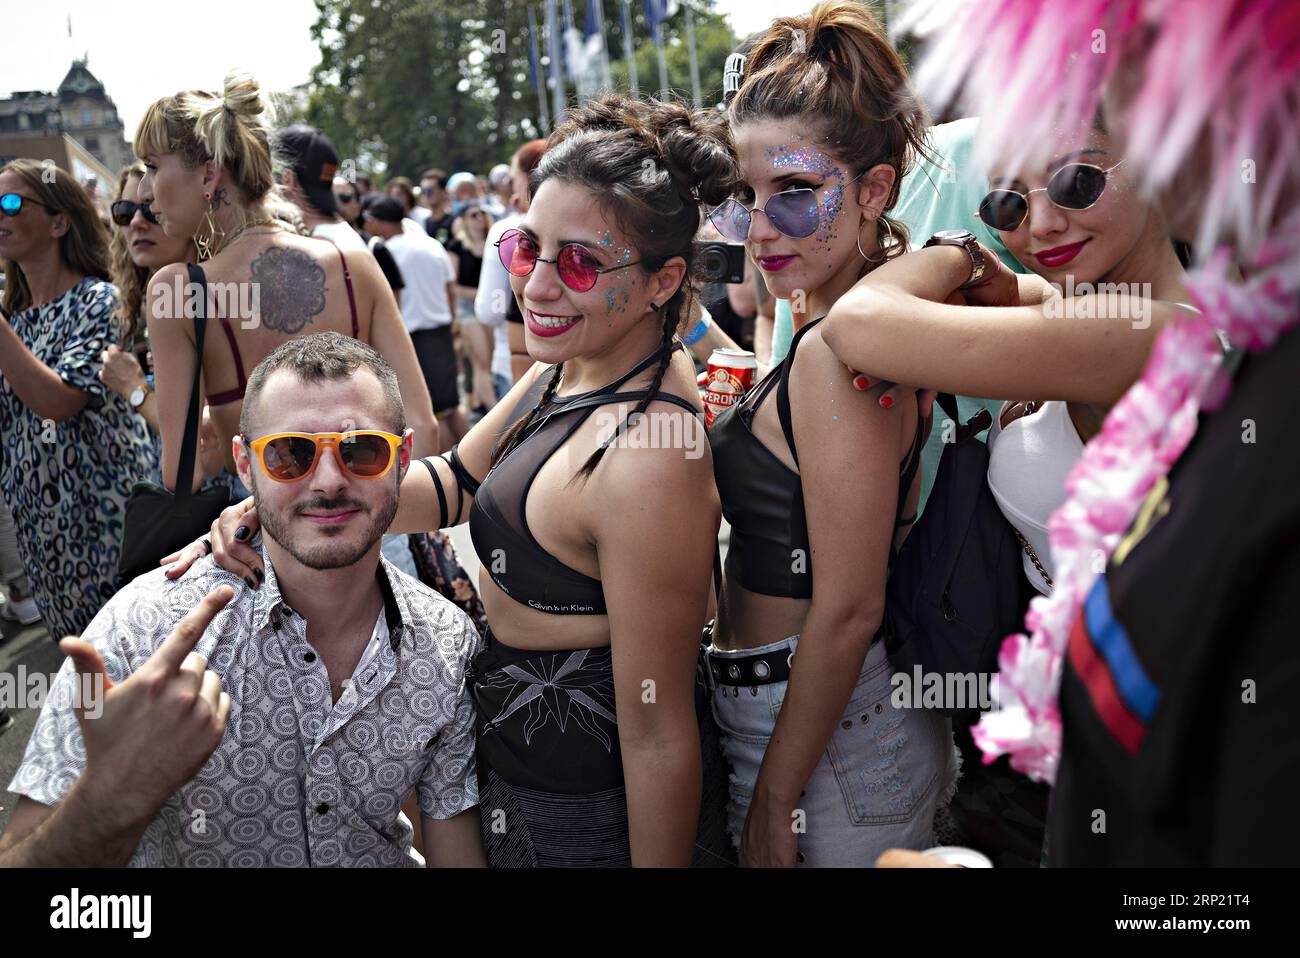 (180811) -- ZURICH, Aug. 11, 2018 -- People participate in the 27th Zurich Street Parade in central Zurich, Switzerland, Aug. 11, 2018. With this year s motto Culture of Tolerance , the annual dance music event Street Parade was held in Zurich on Saturday, attracting about one million participants. ) SWITZERLAND-ZURICH-STREET PARADE MichelexLimina PUBLICATIONxNOTxINxCHN Stock Photo